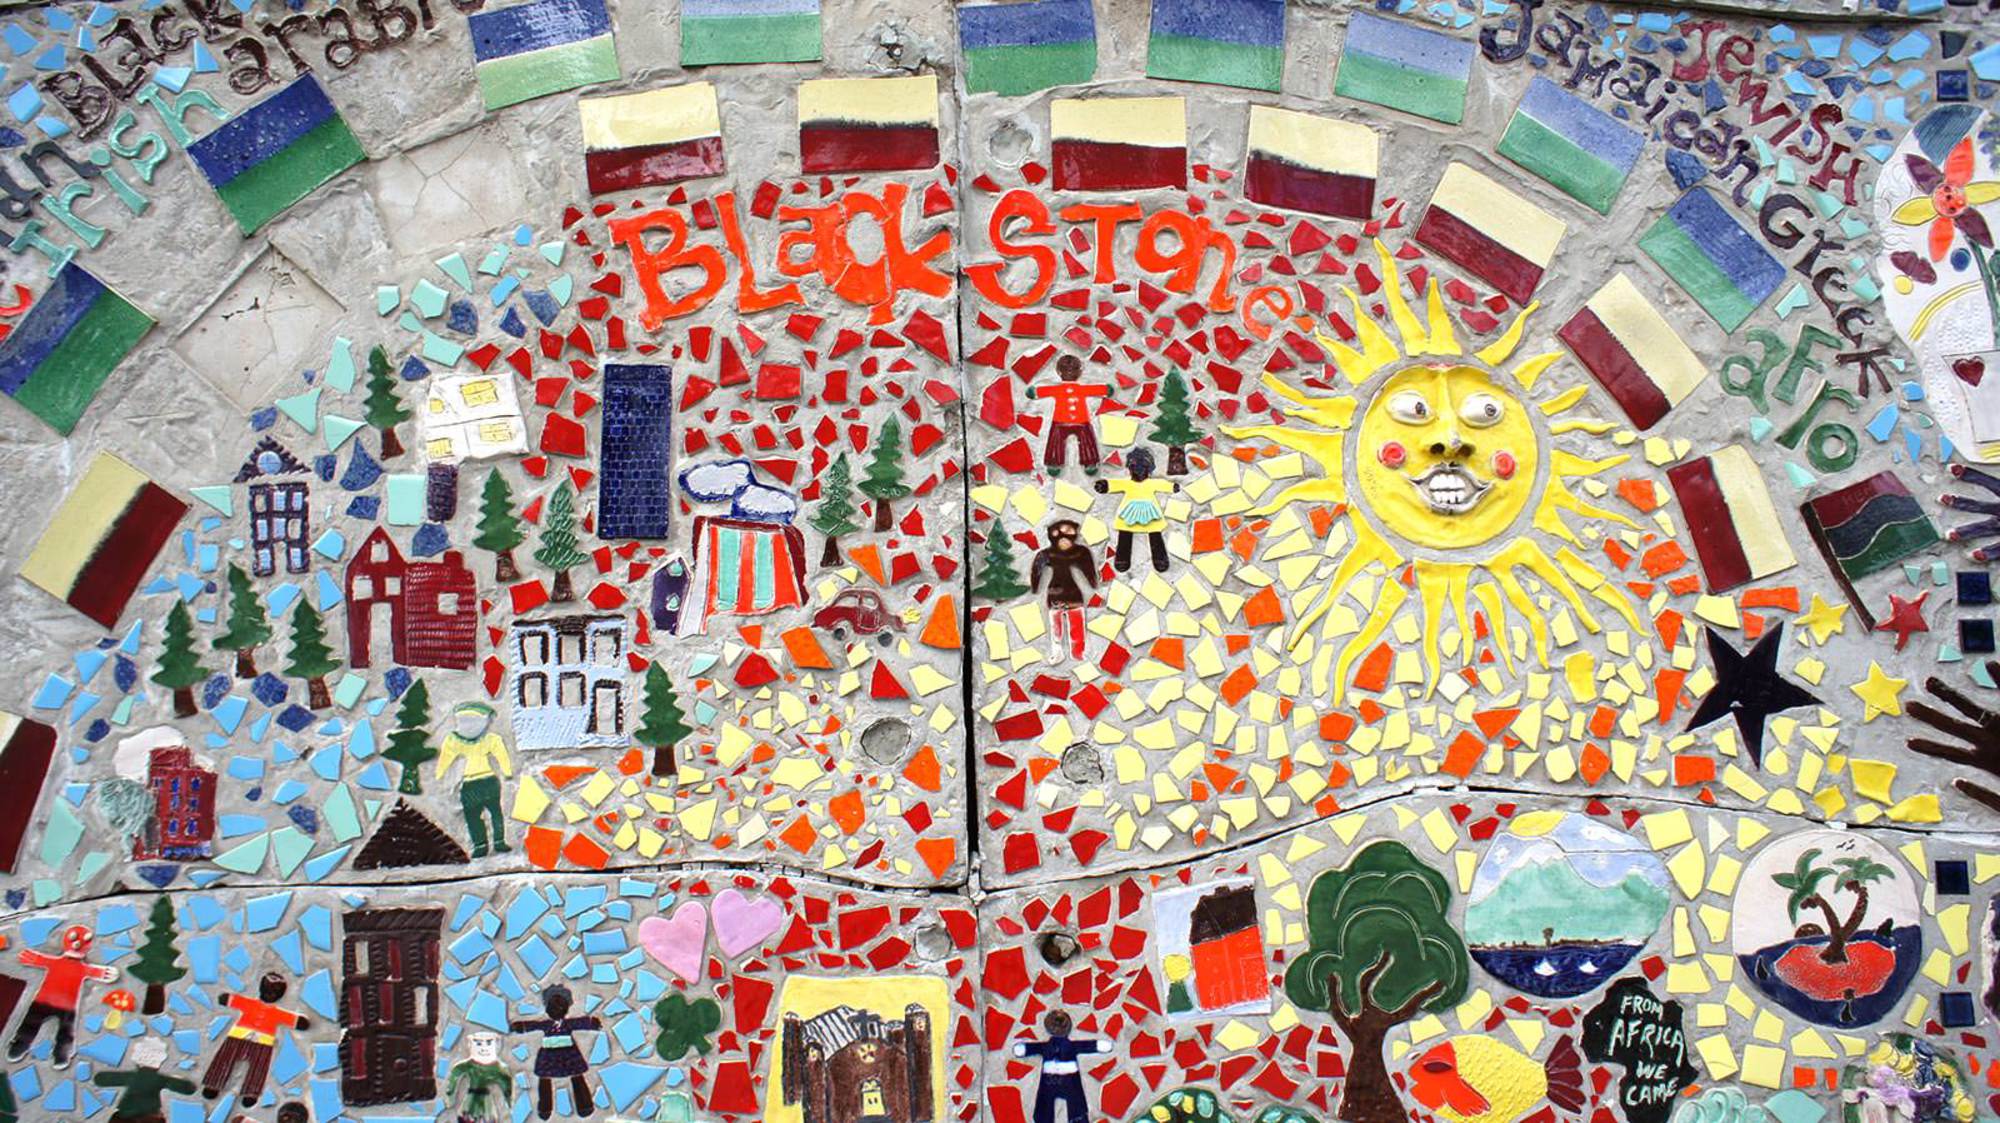 Mosaic by the entrance of the BCC